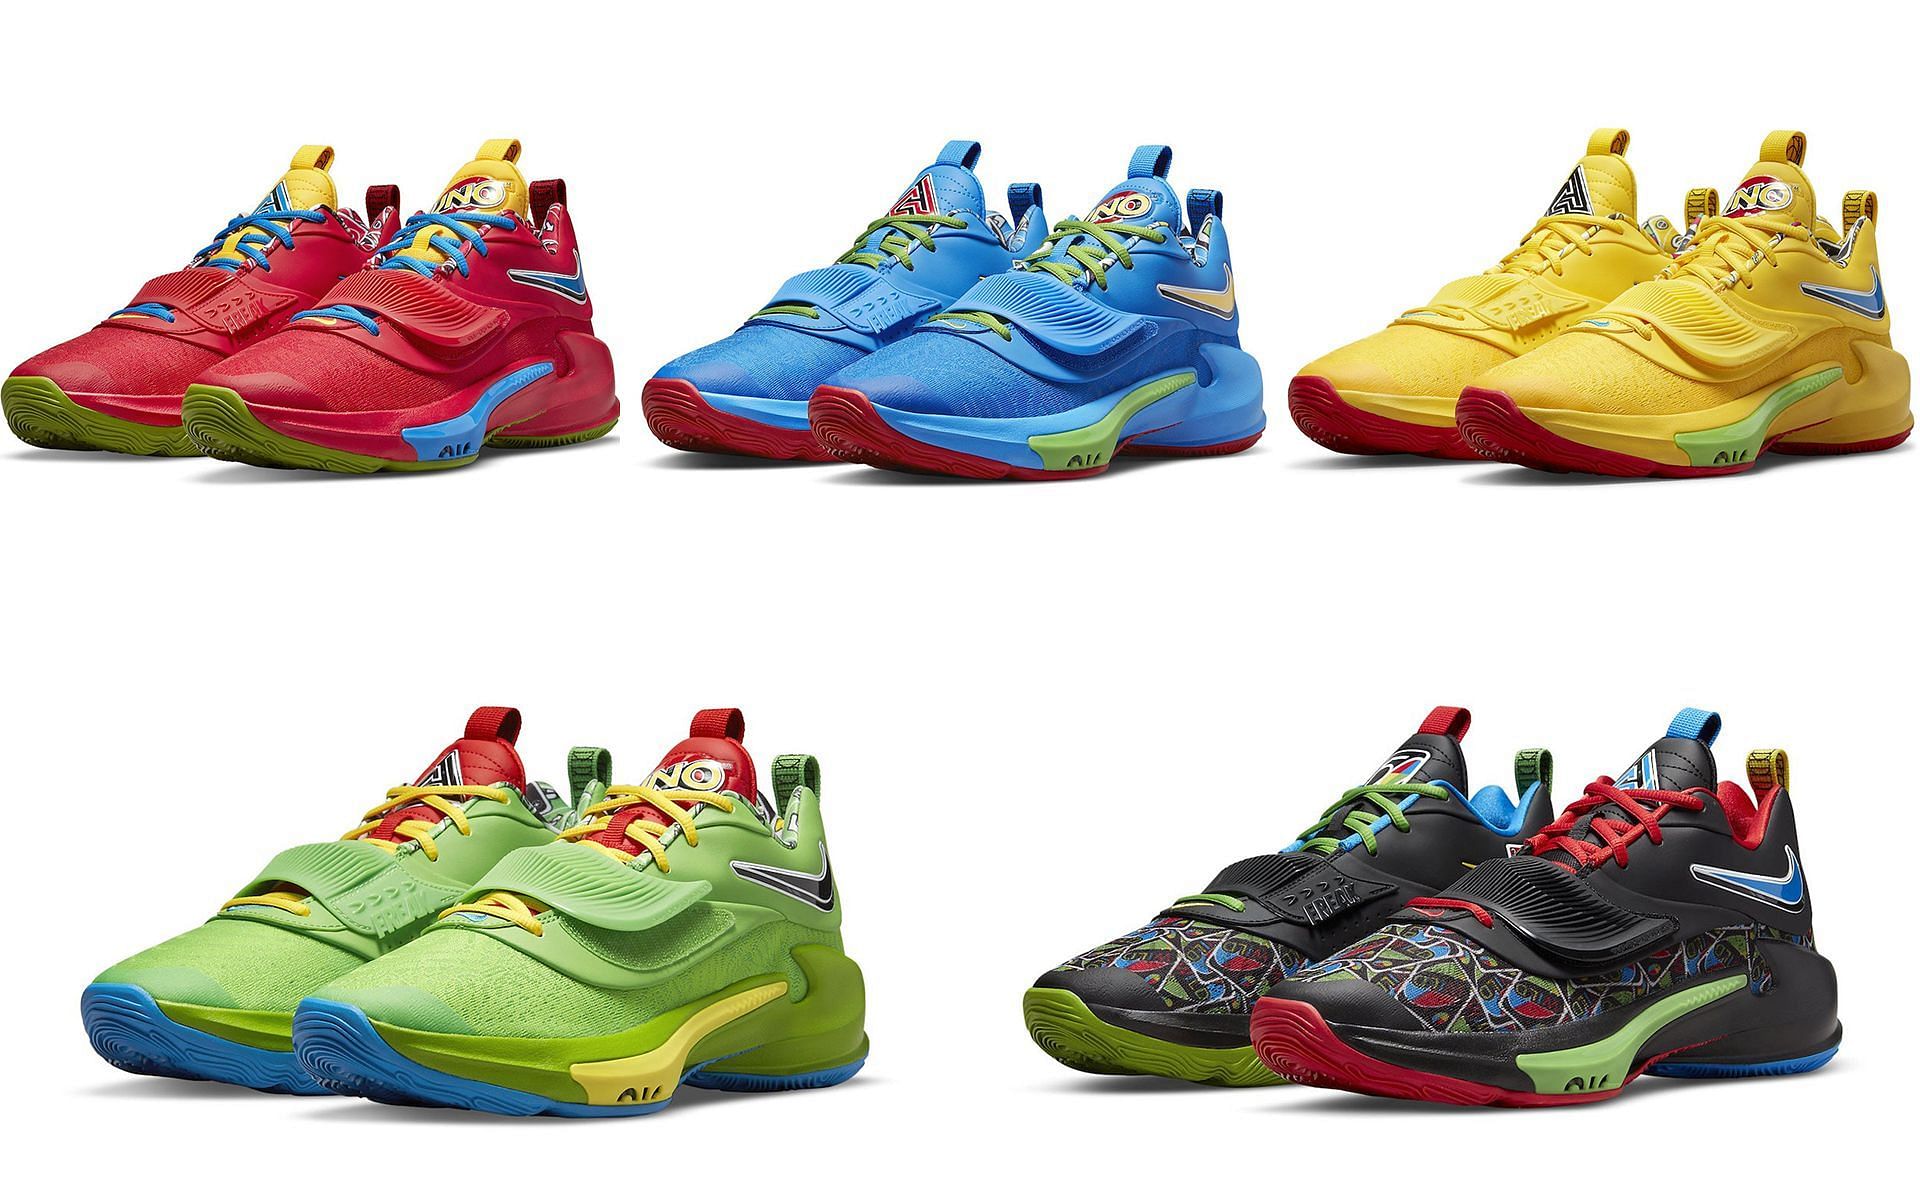 Nike collaborated with UNO to release Nike Freak 3 sneakers (Image via Nike)